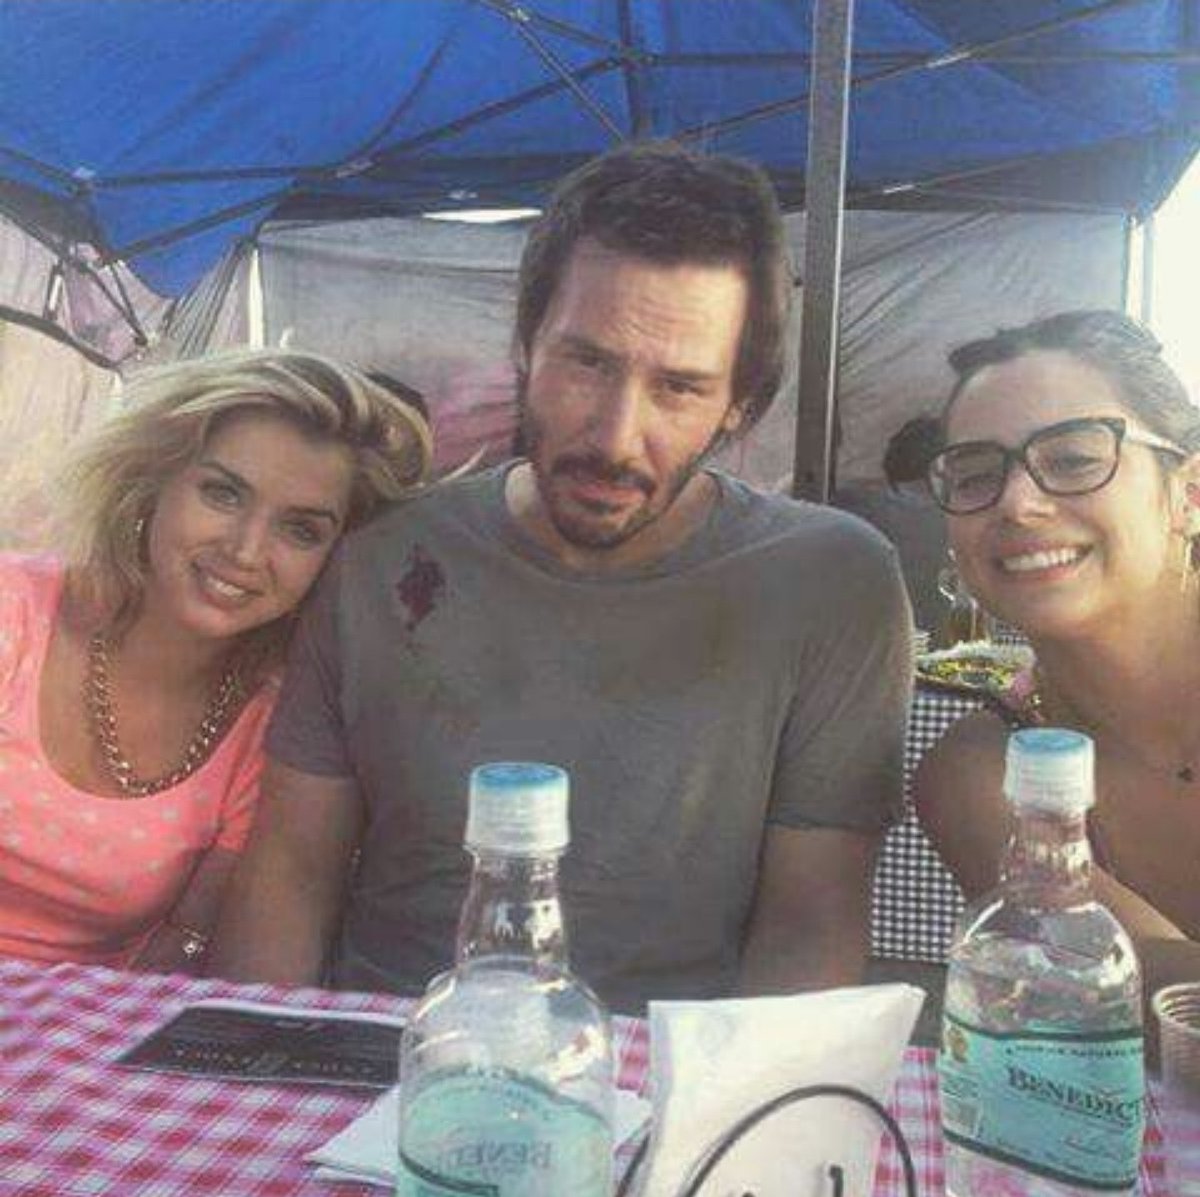 Ana de Armas, Keanu Reeves and Lorenza Izzo from the sets of Knock Knock (2015).